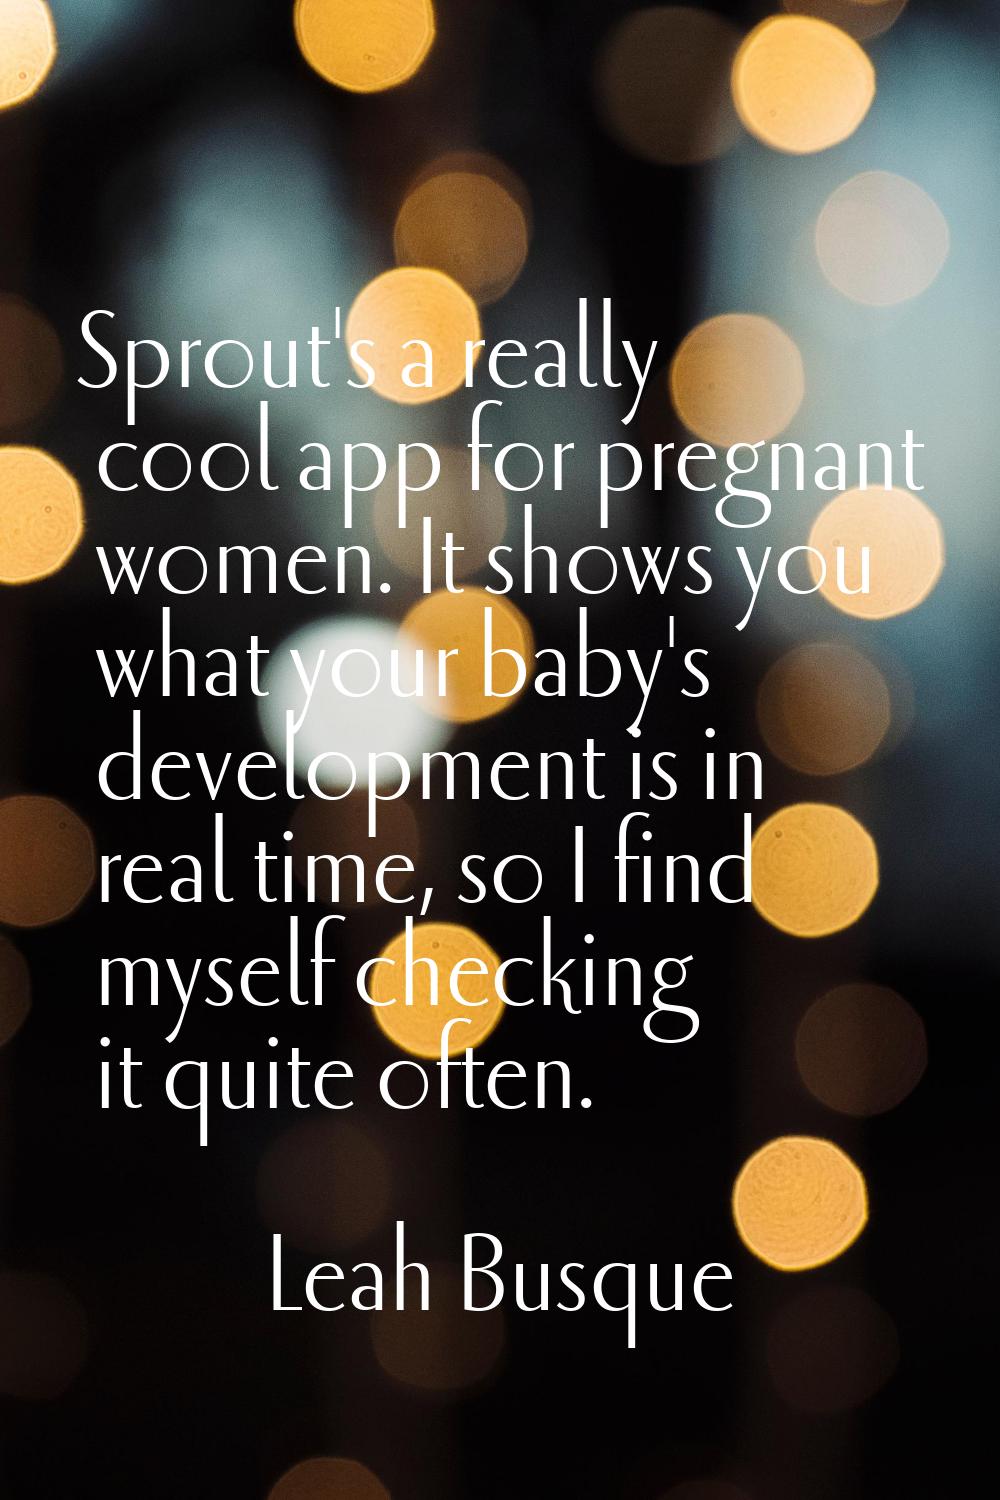 Sprout's a really cool app for pregnant women. It shows you what your baby's development is in real